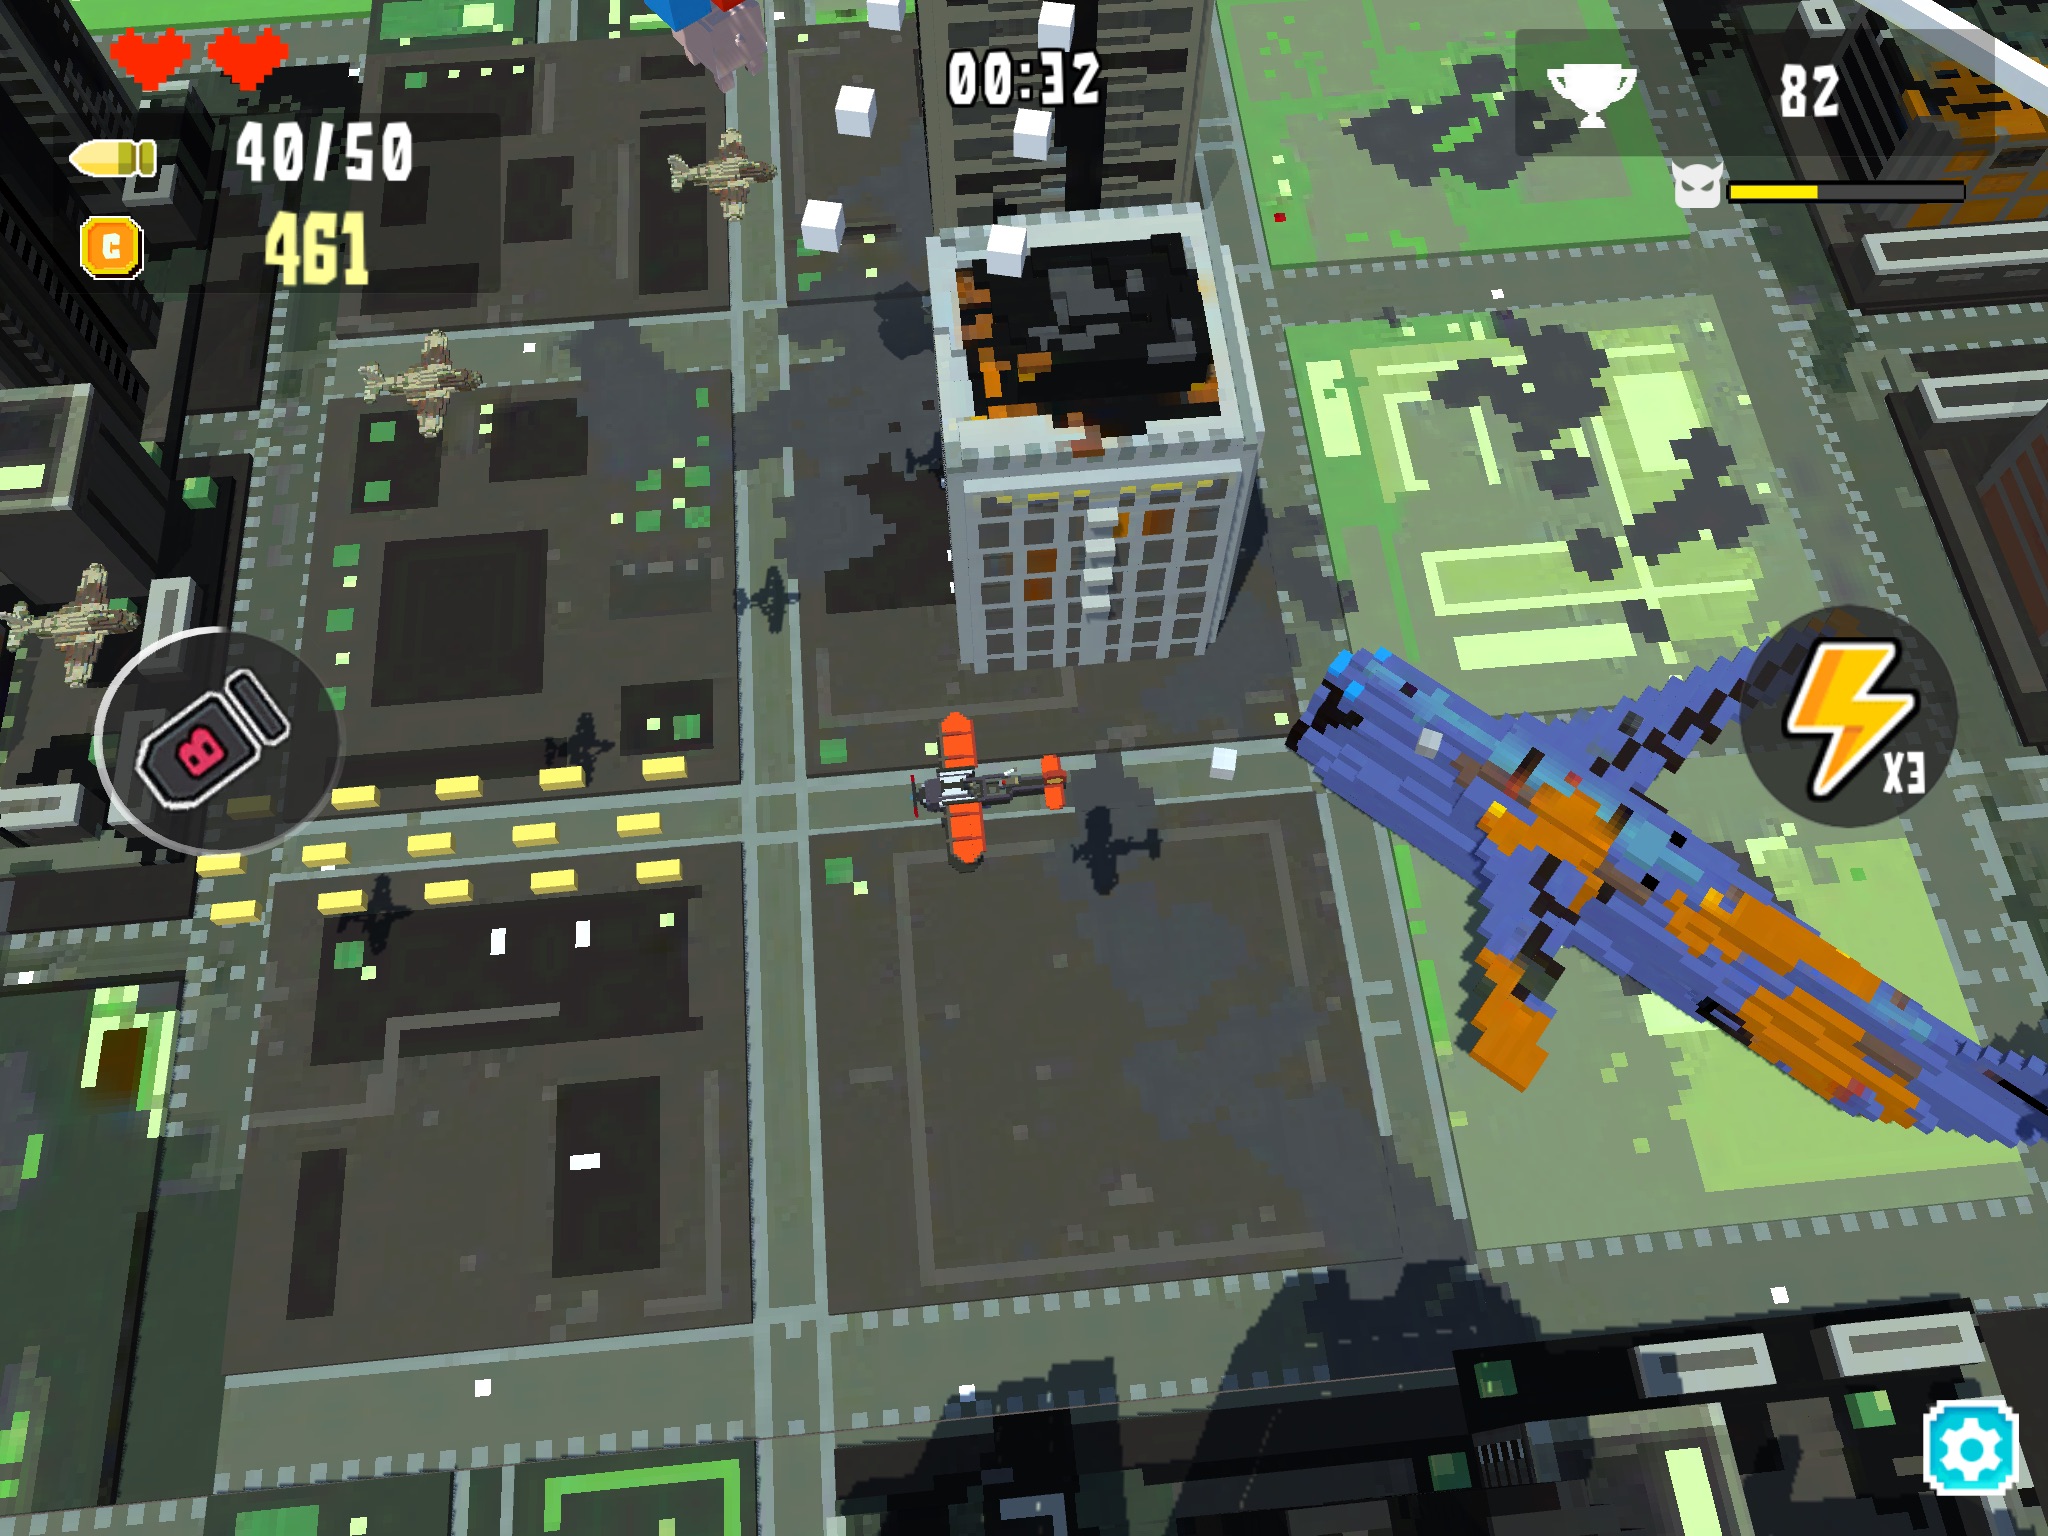 'Aero Smash' Review - Fly Your Way Across Voxel Battlegrounds for the High Score